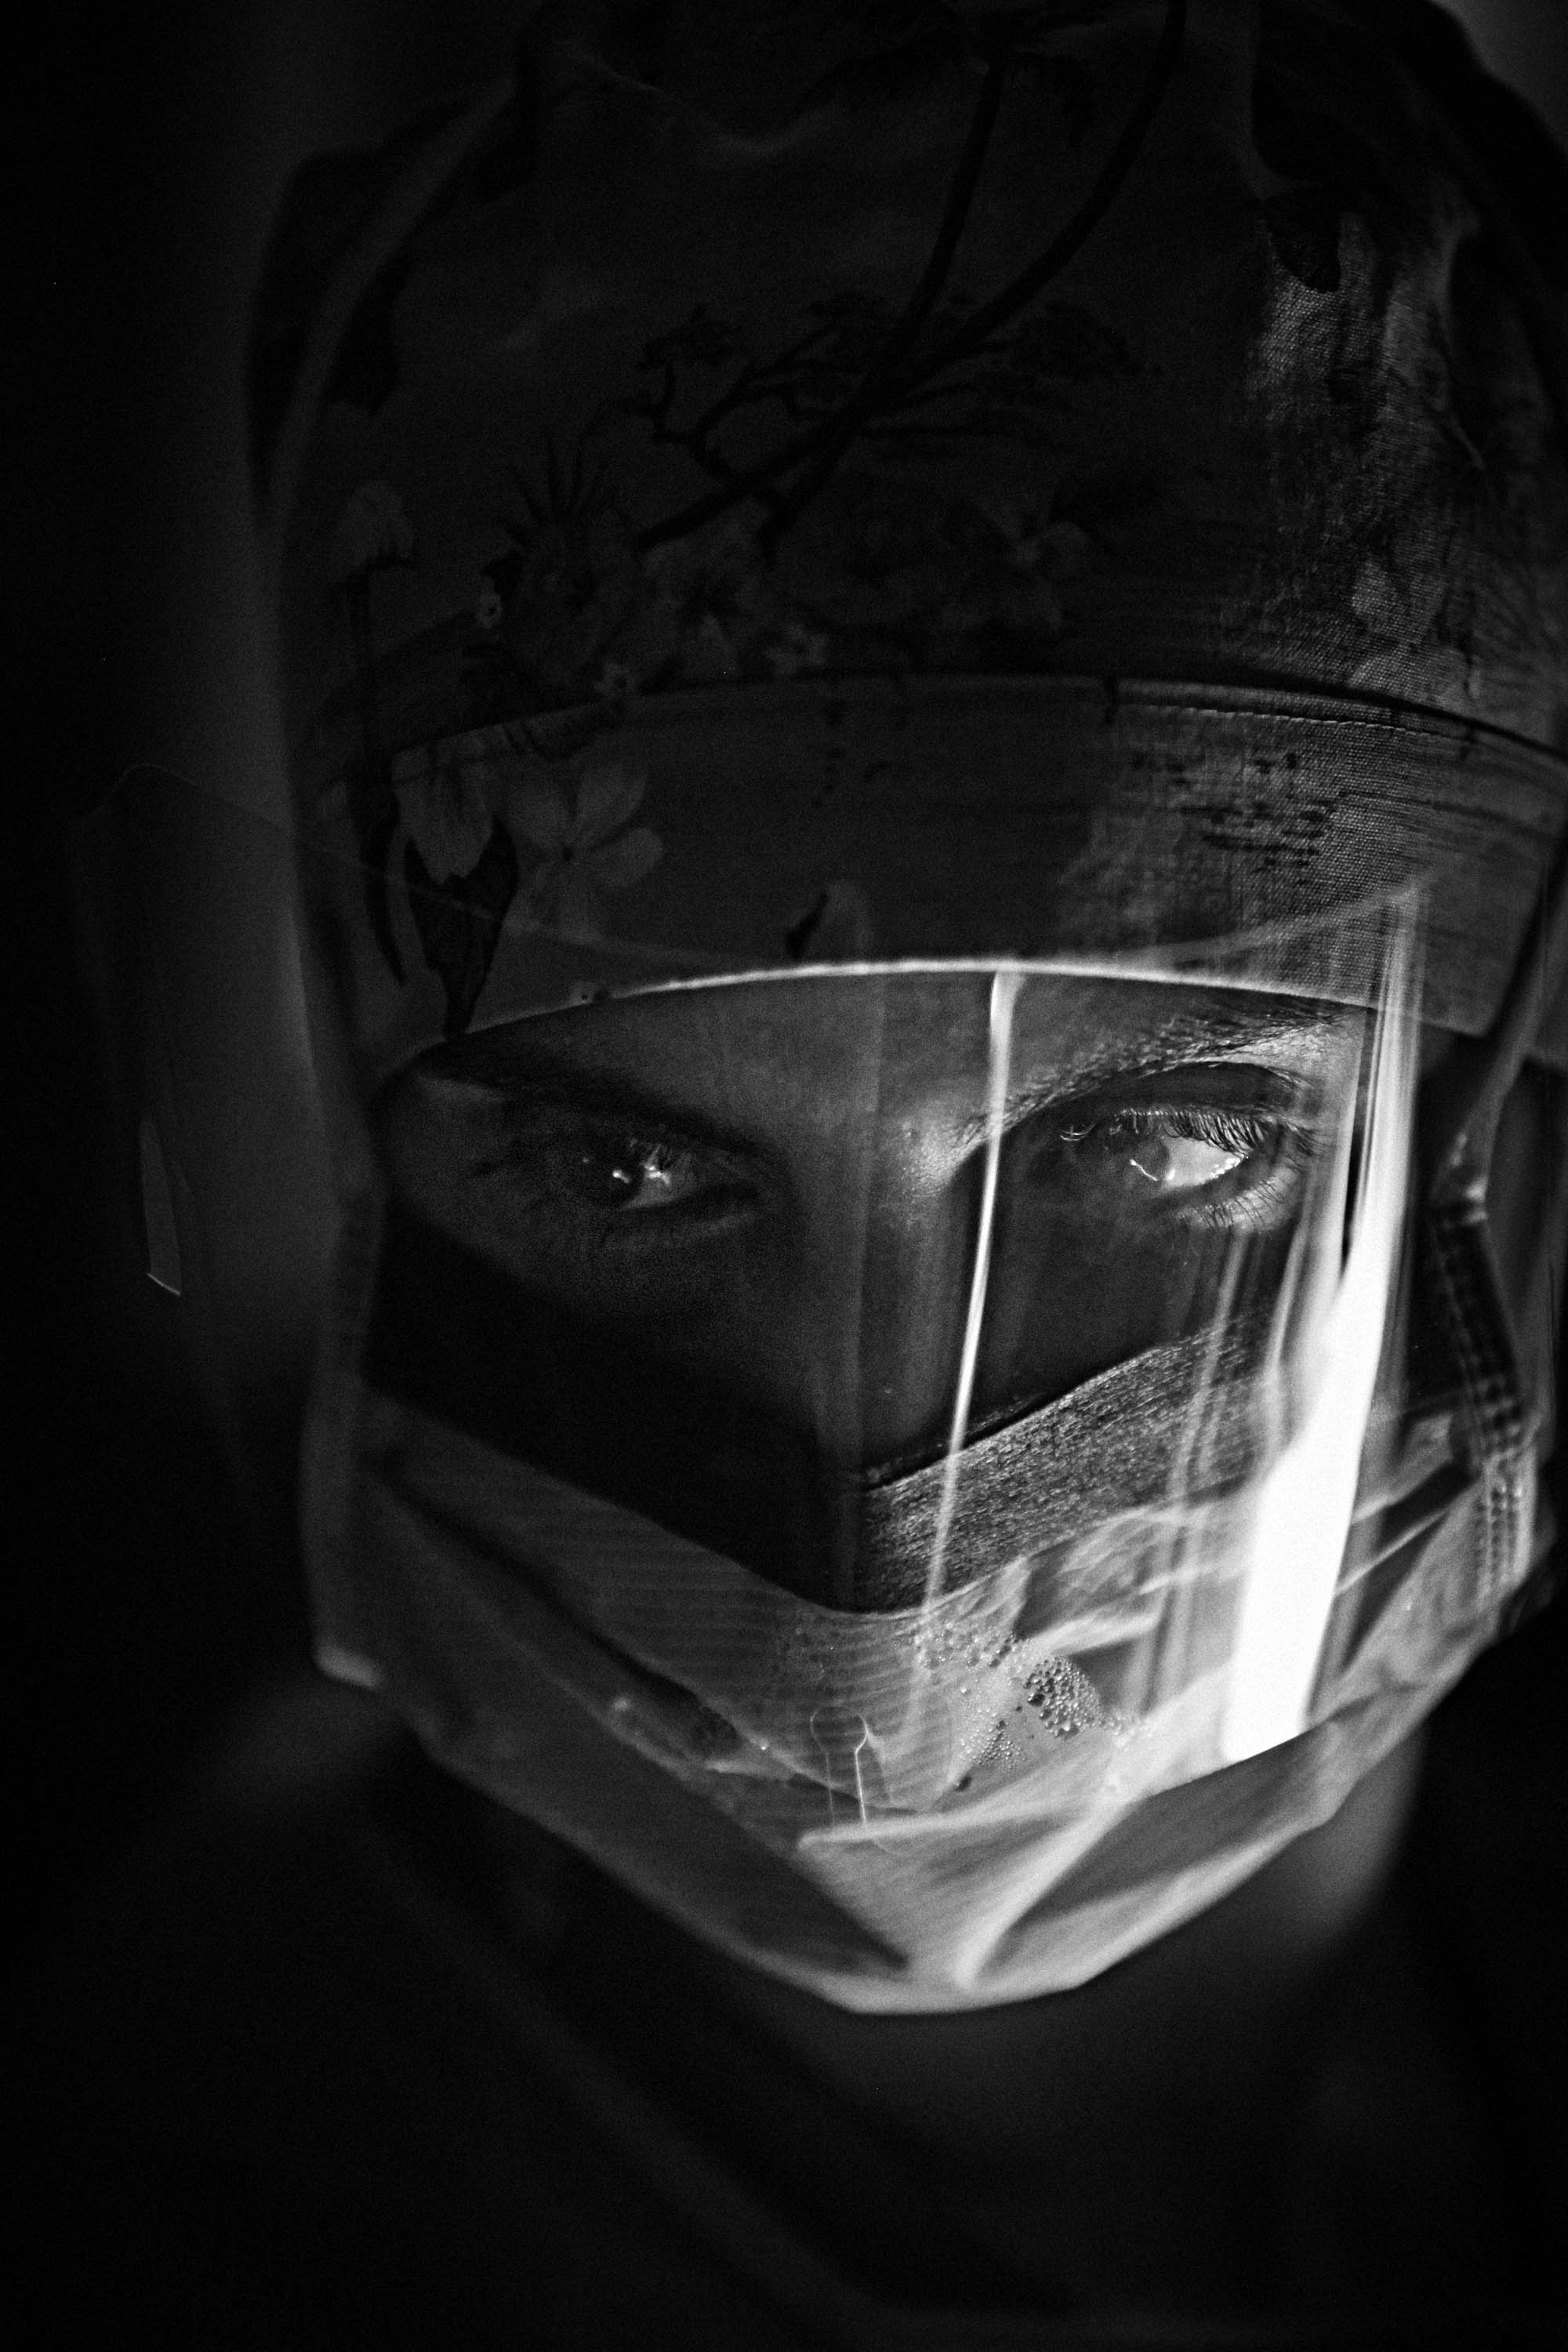 Dr. Arghavan Salles, 35, photographed as a surgical resident at Stanford Health Care. (Balazs Gardi)